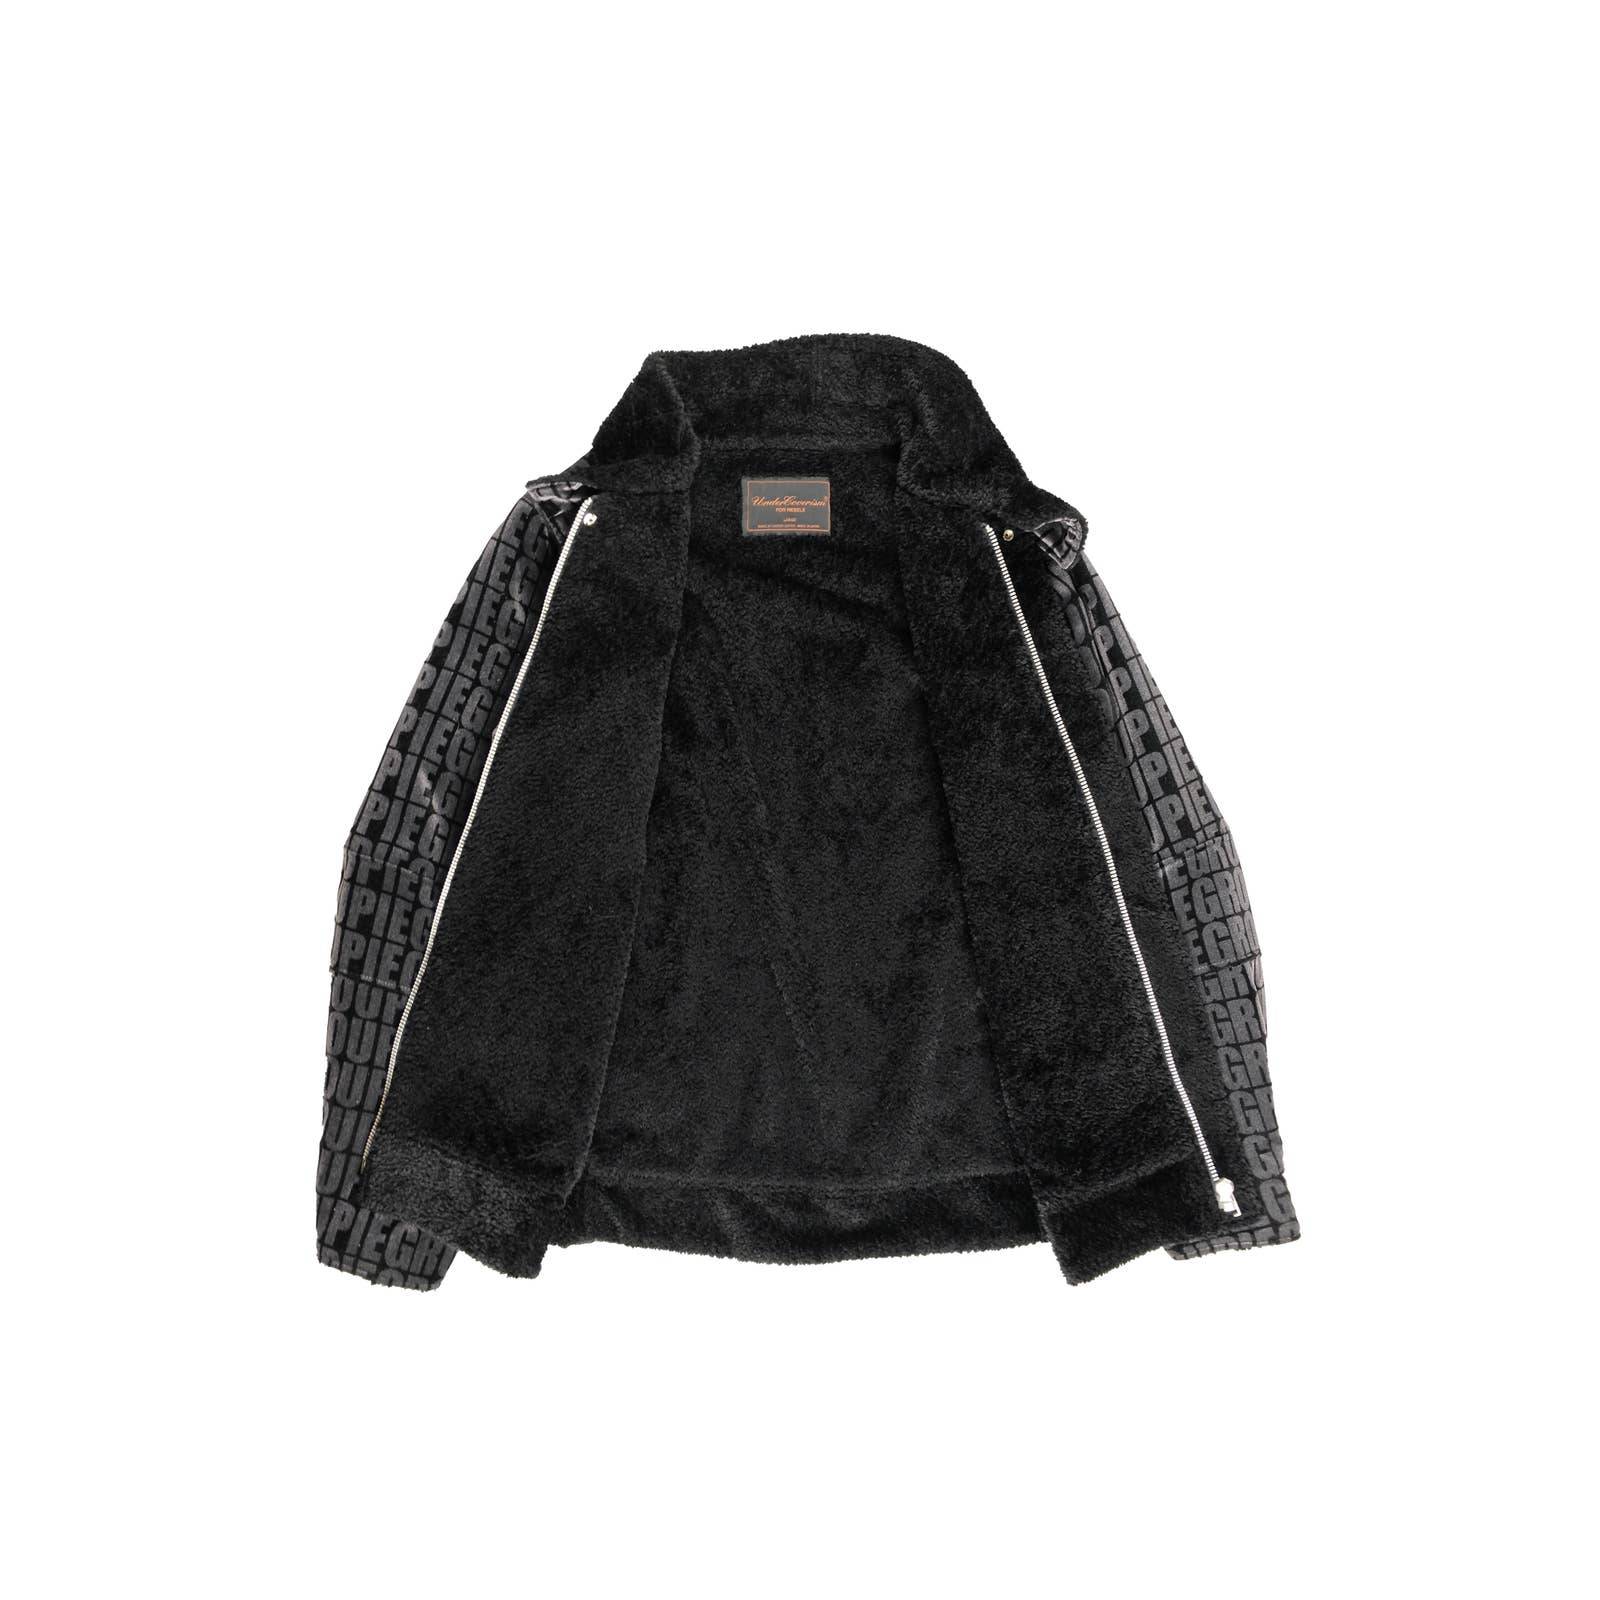 'Witch's Cell' Groupie Shearling Jacket - Groupie